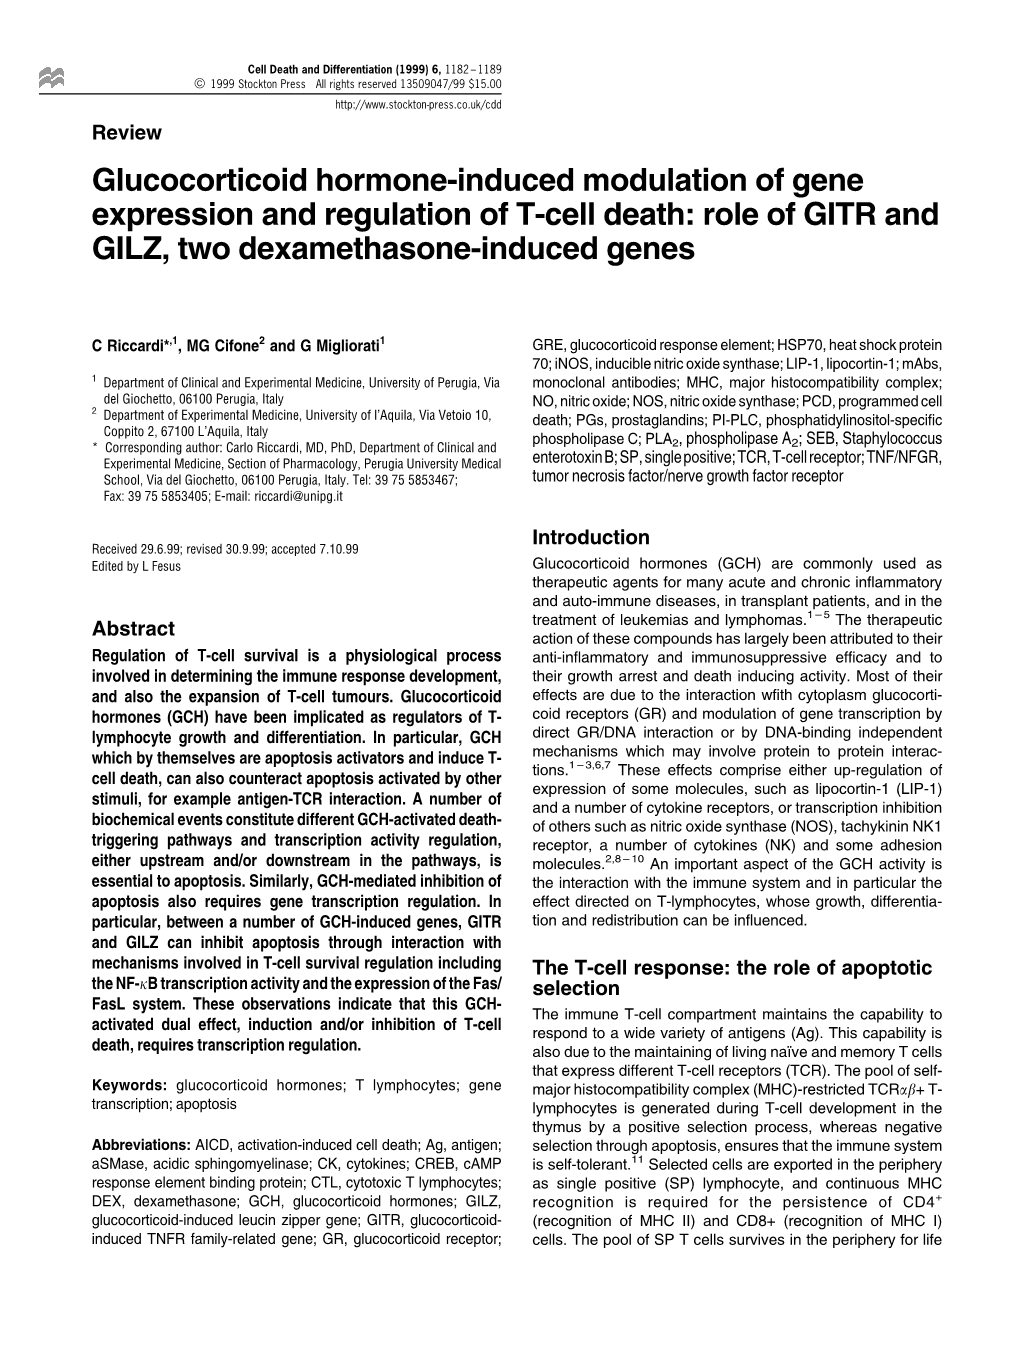 Glucocorticoid Hormone-Induced Modulation of Gene Expression and Regulation of T-Cell Death: Role of GITR and GILZ, Two Dexamethasone-Induced Genes